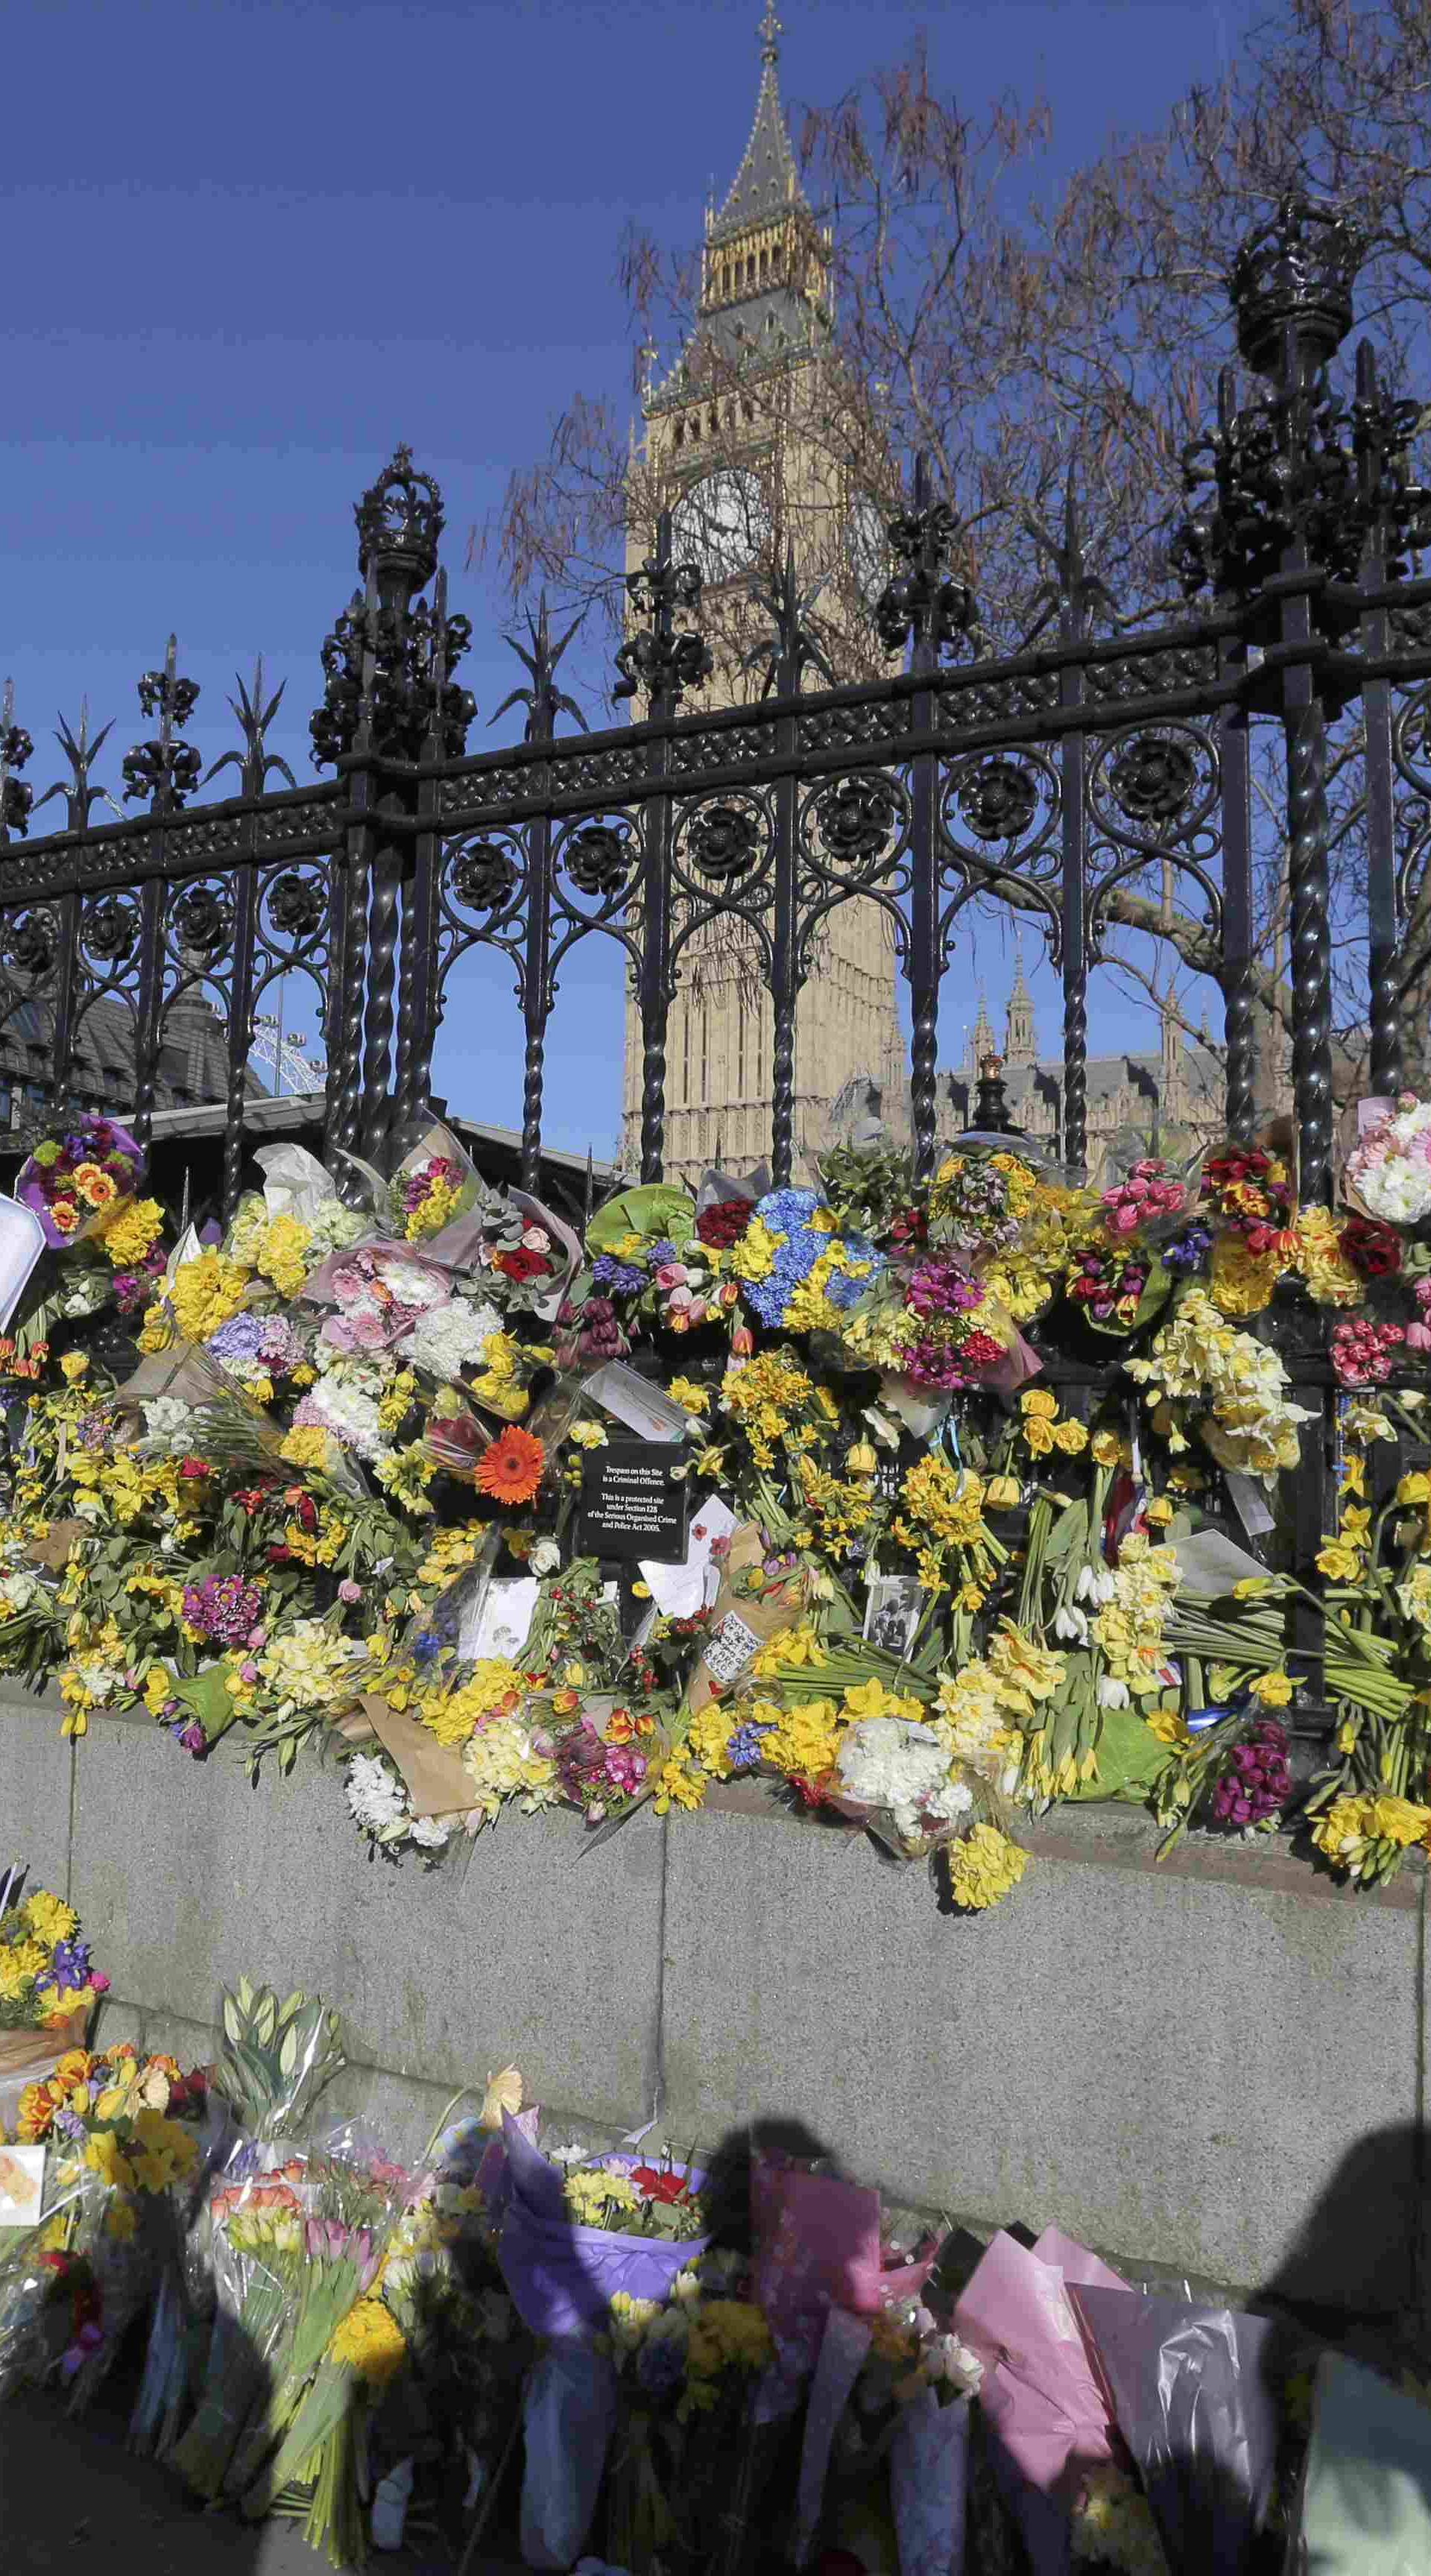 Onlookers view floral tributes on the wall surrounding the Houses of Parliament, following the attack in Westminster earlier in the week, in central London